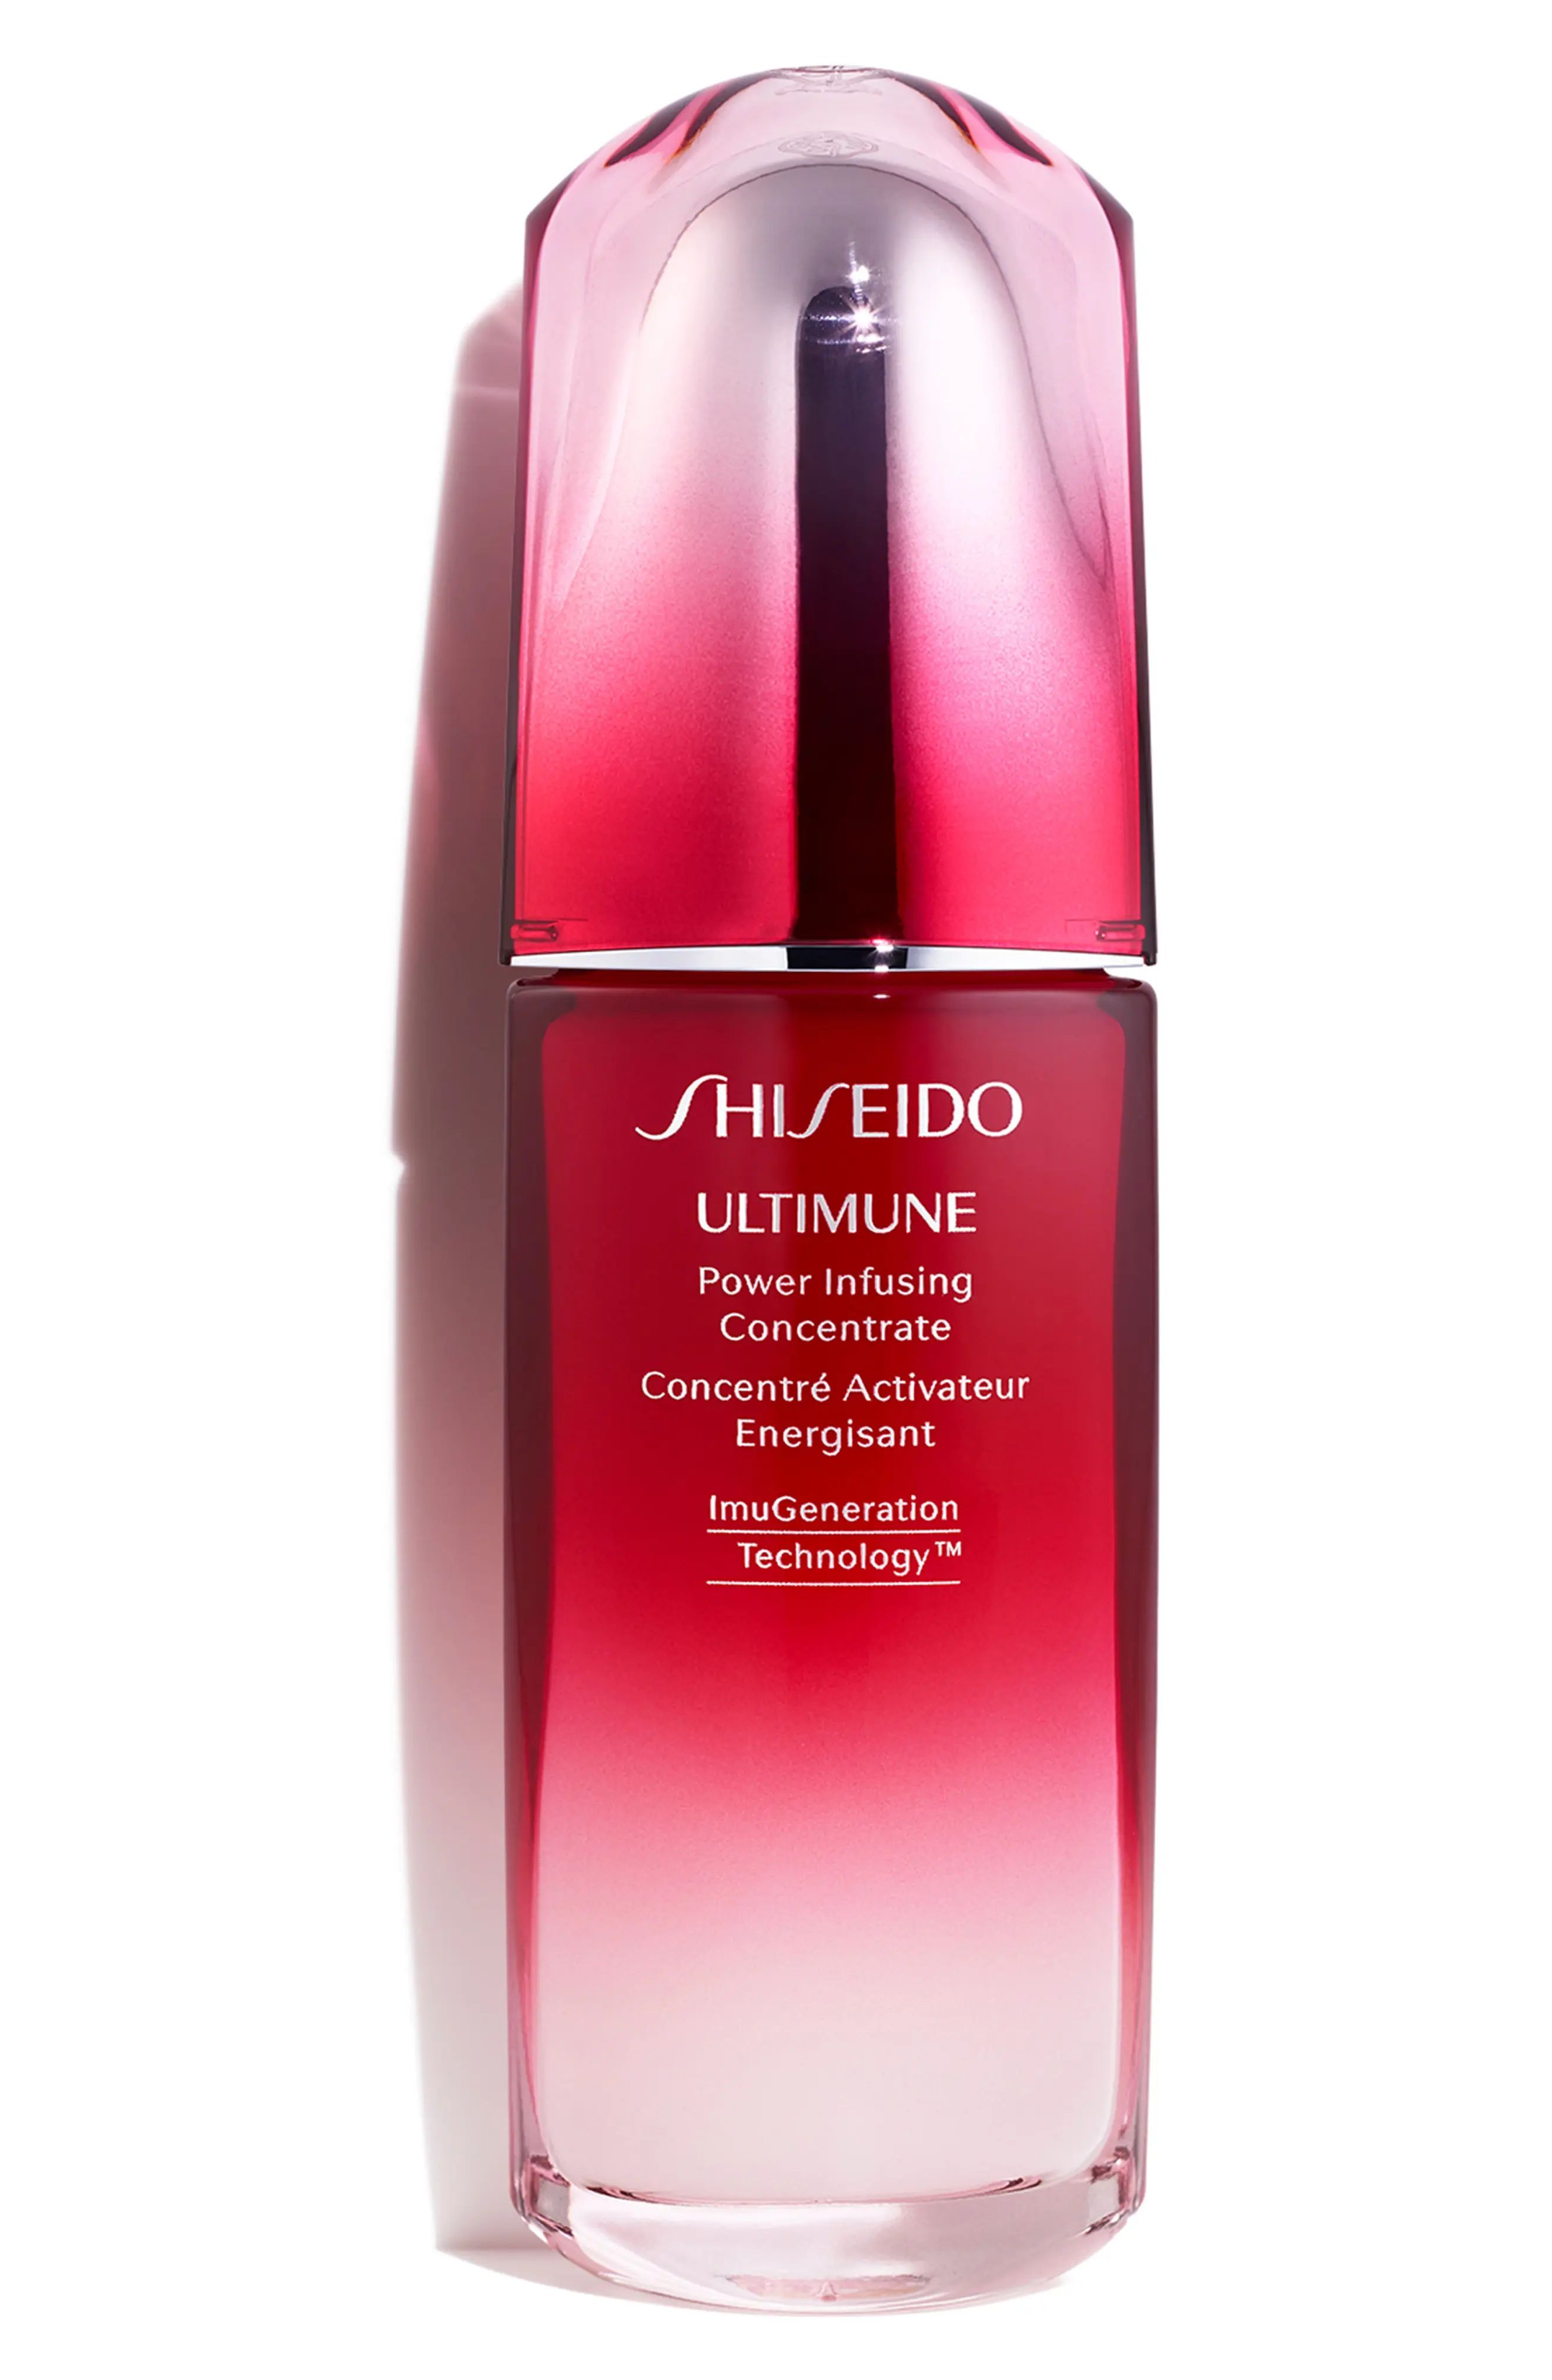 Shiseido Ultimune Power Infusing Concentrate Serum with ImuGeneration Technology(TM), Size 1.69 Oz a | Nordstrom